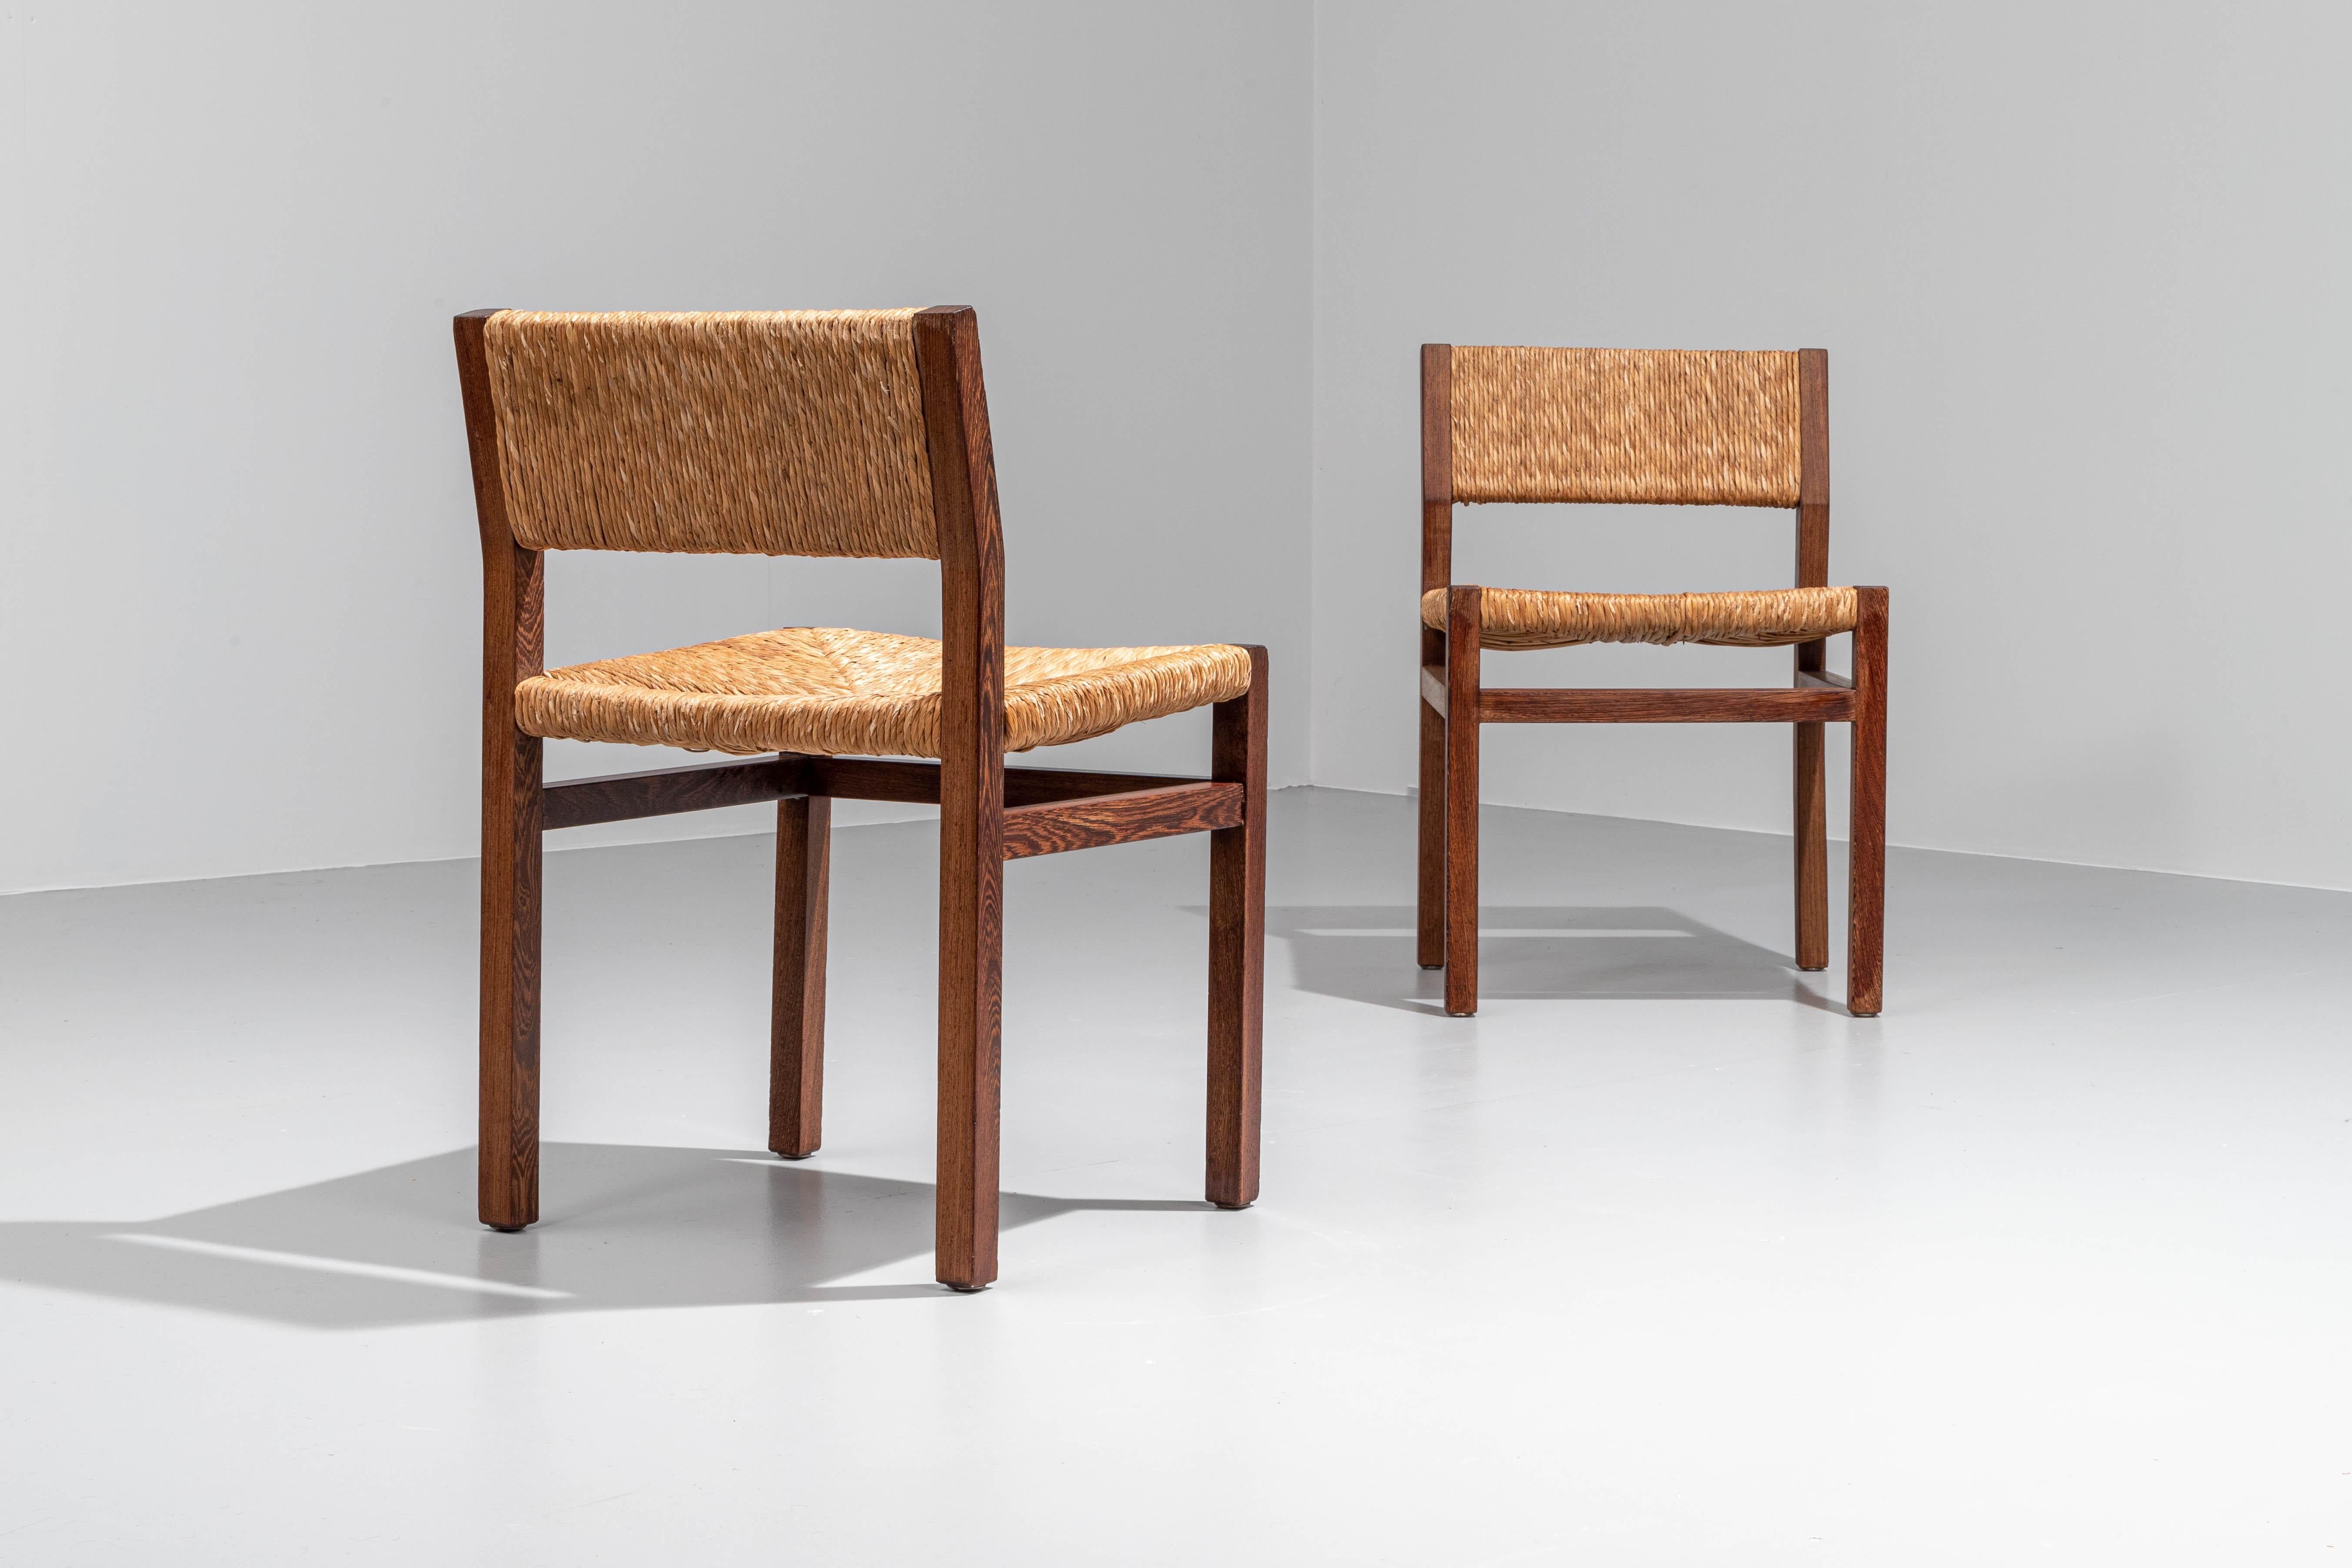 Dutch Set of 4 Dining Chairs by Martin Visser for 'T Spectrum in Wengé Hardwood, 1967